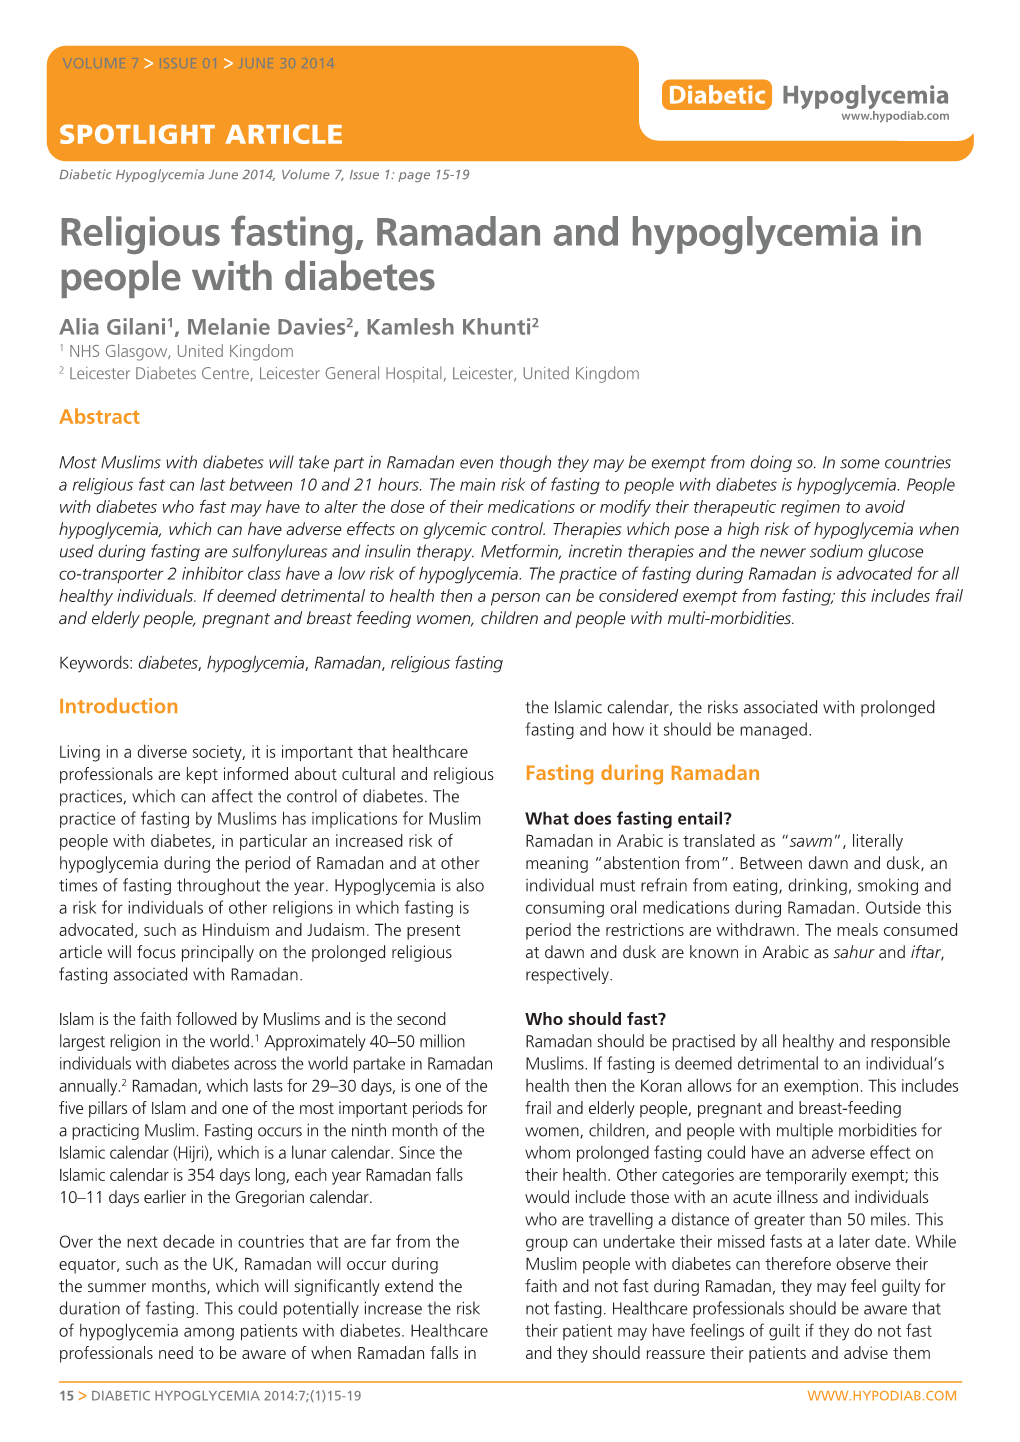 Religious Fasting, Ramadan and Hypoglycemia in People with Diabetes